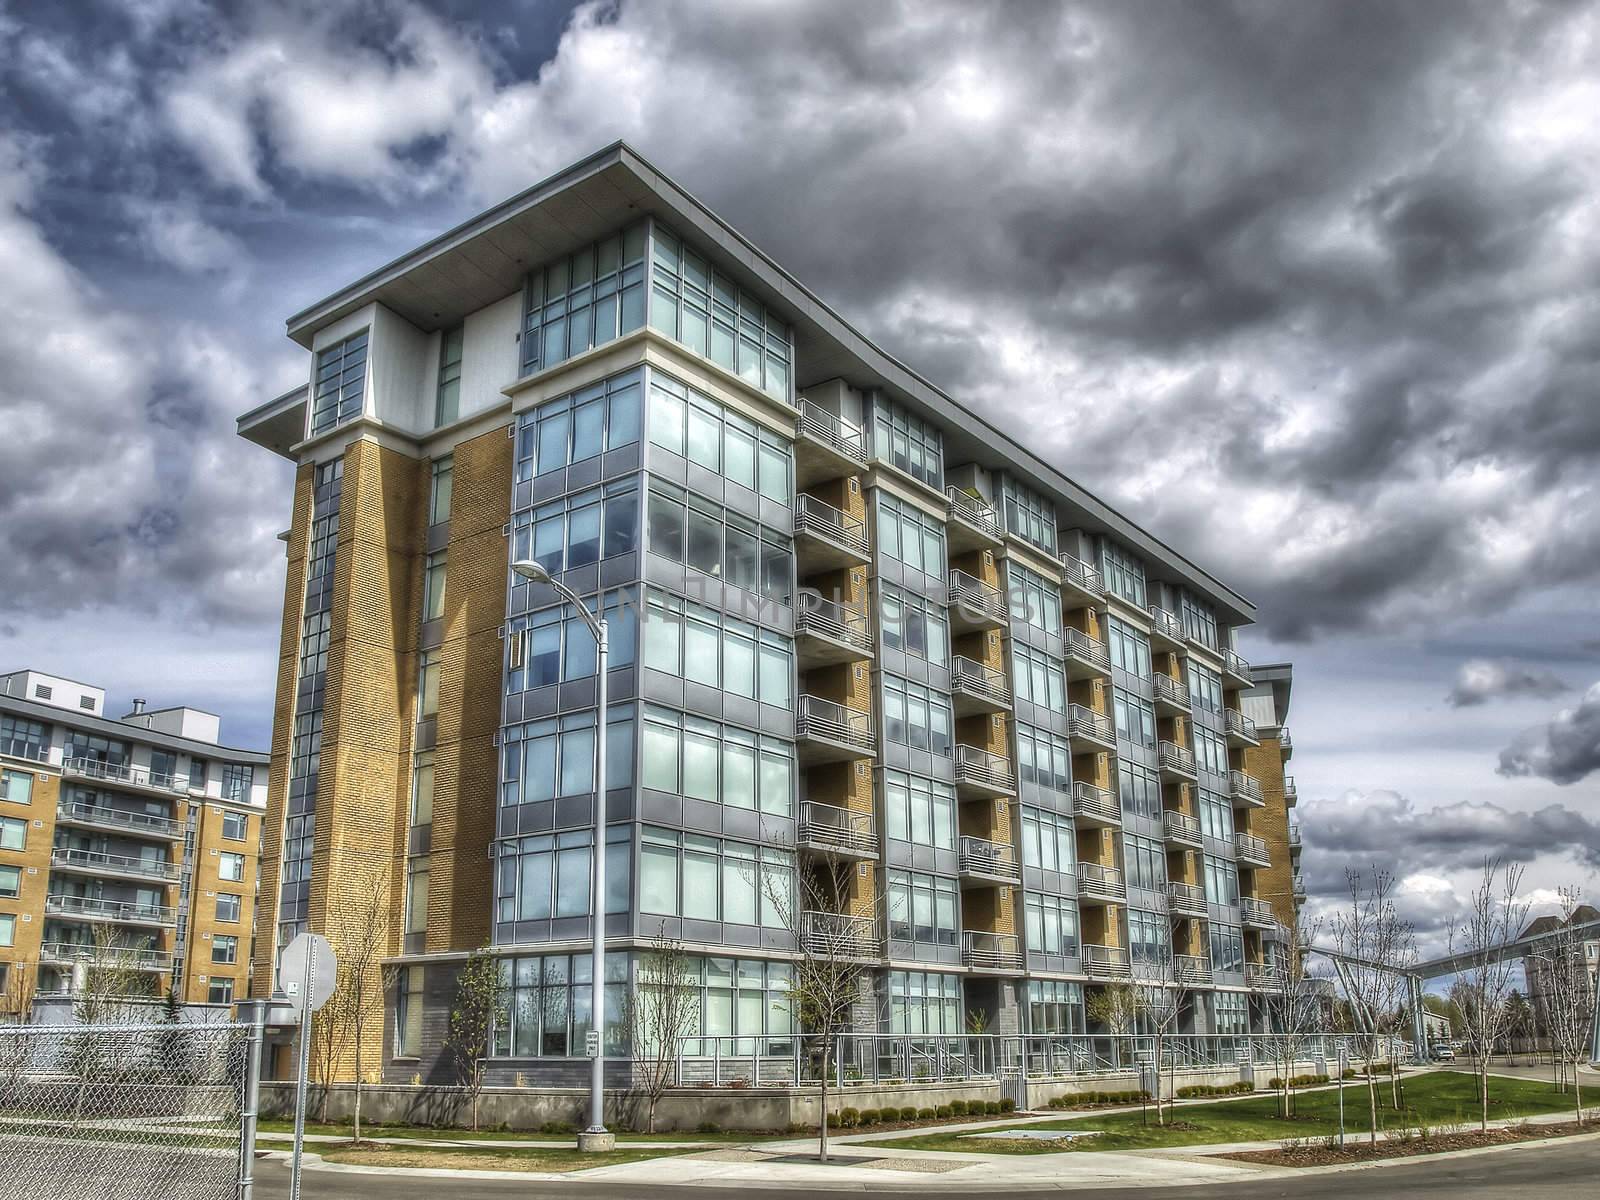 New condo complex development in expanding  Canadian city in HDR.